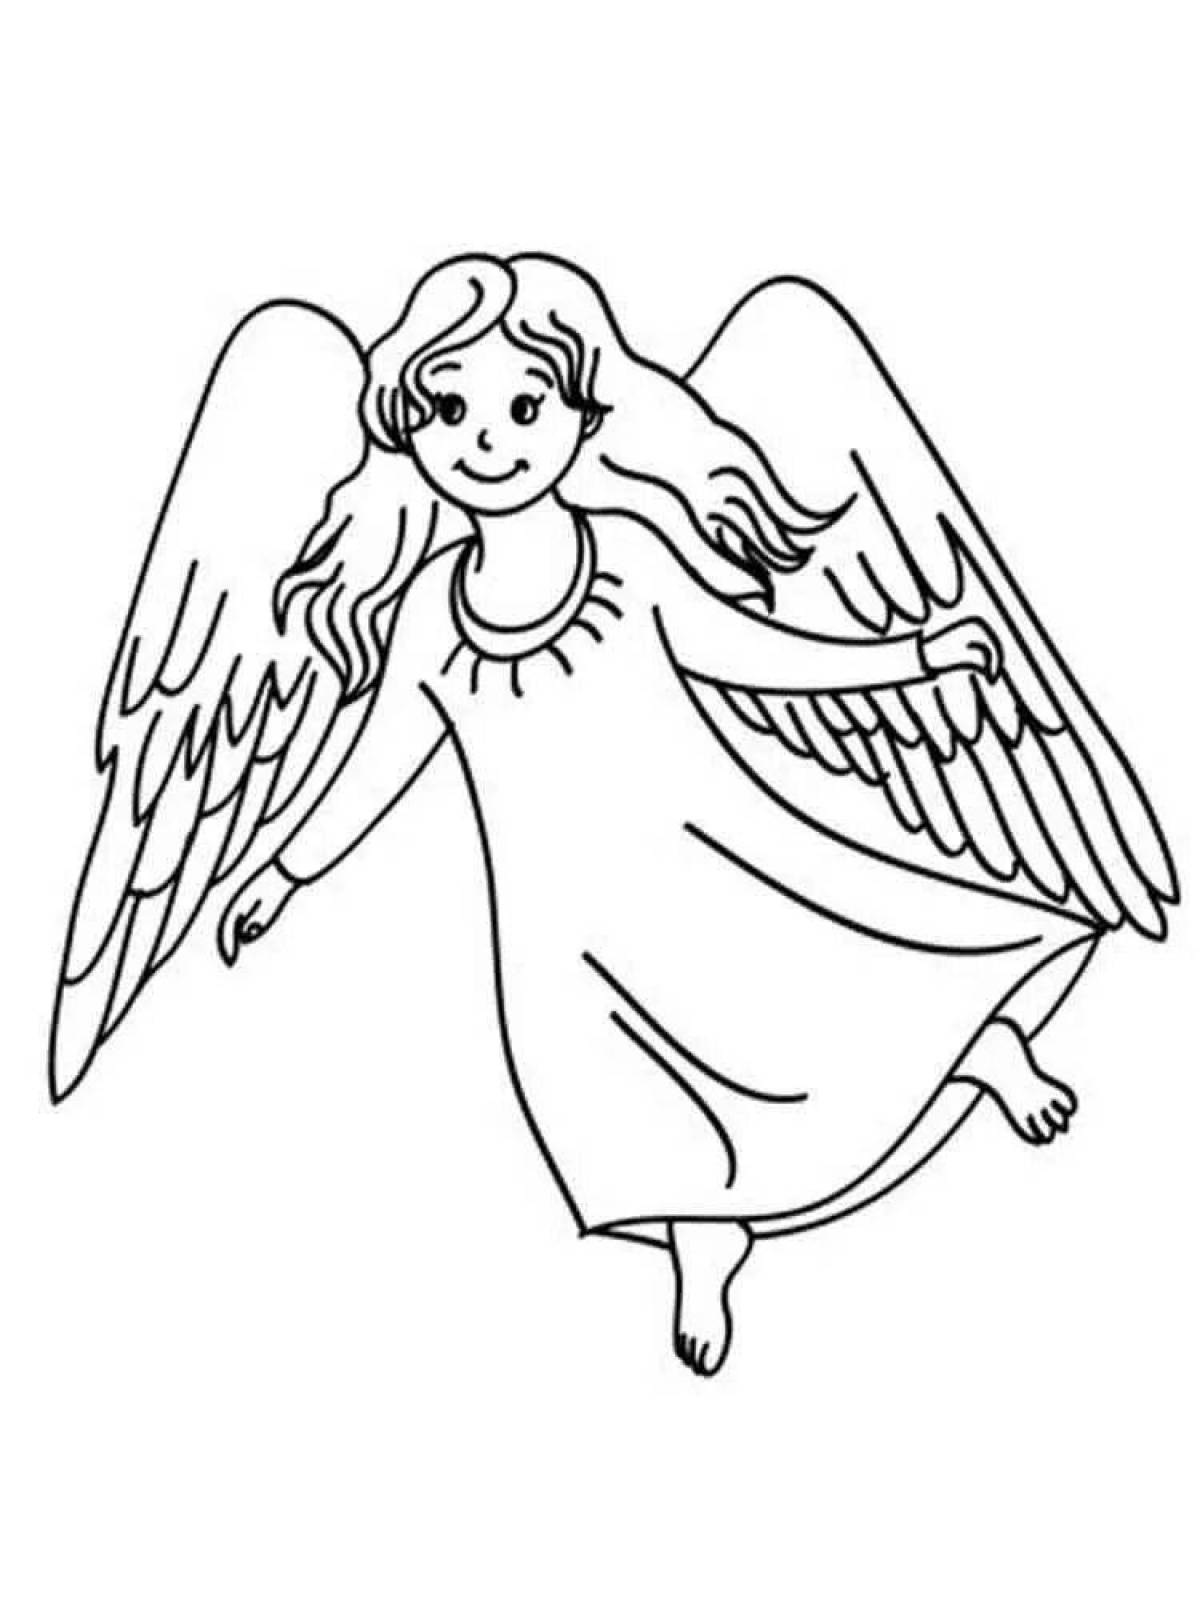 Glorious guardian angel coloring page